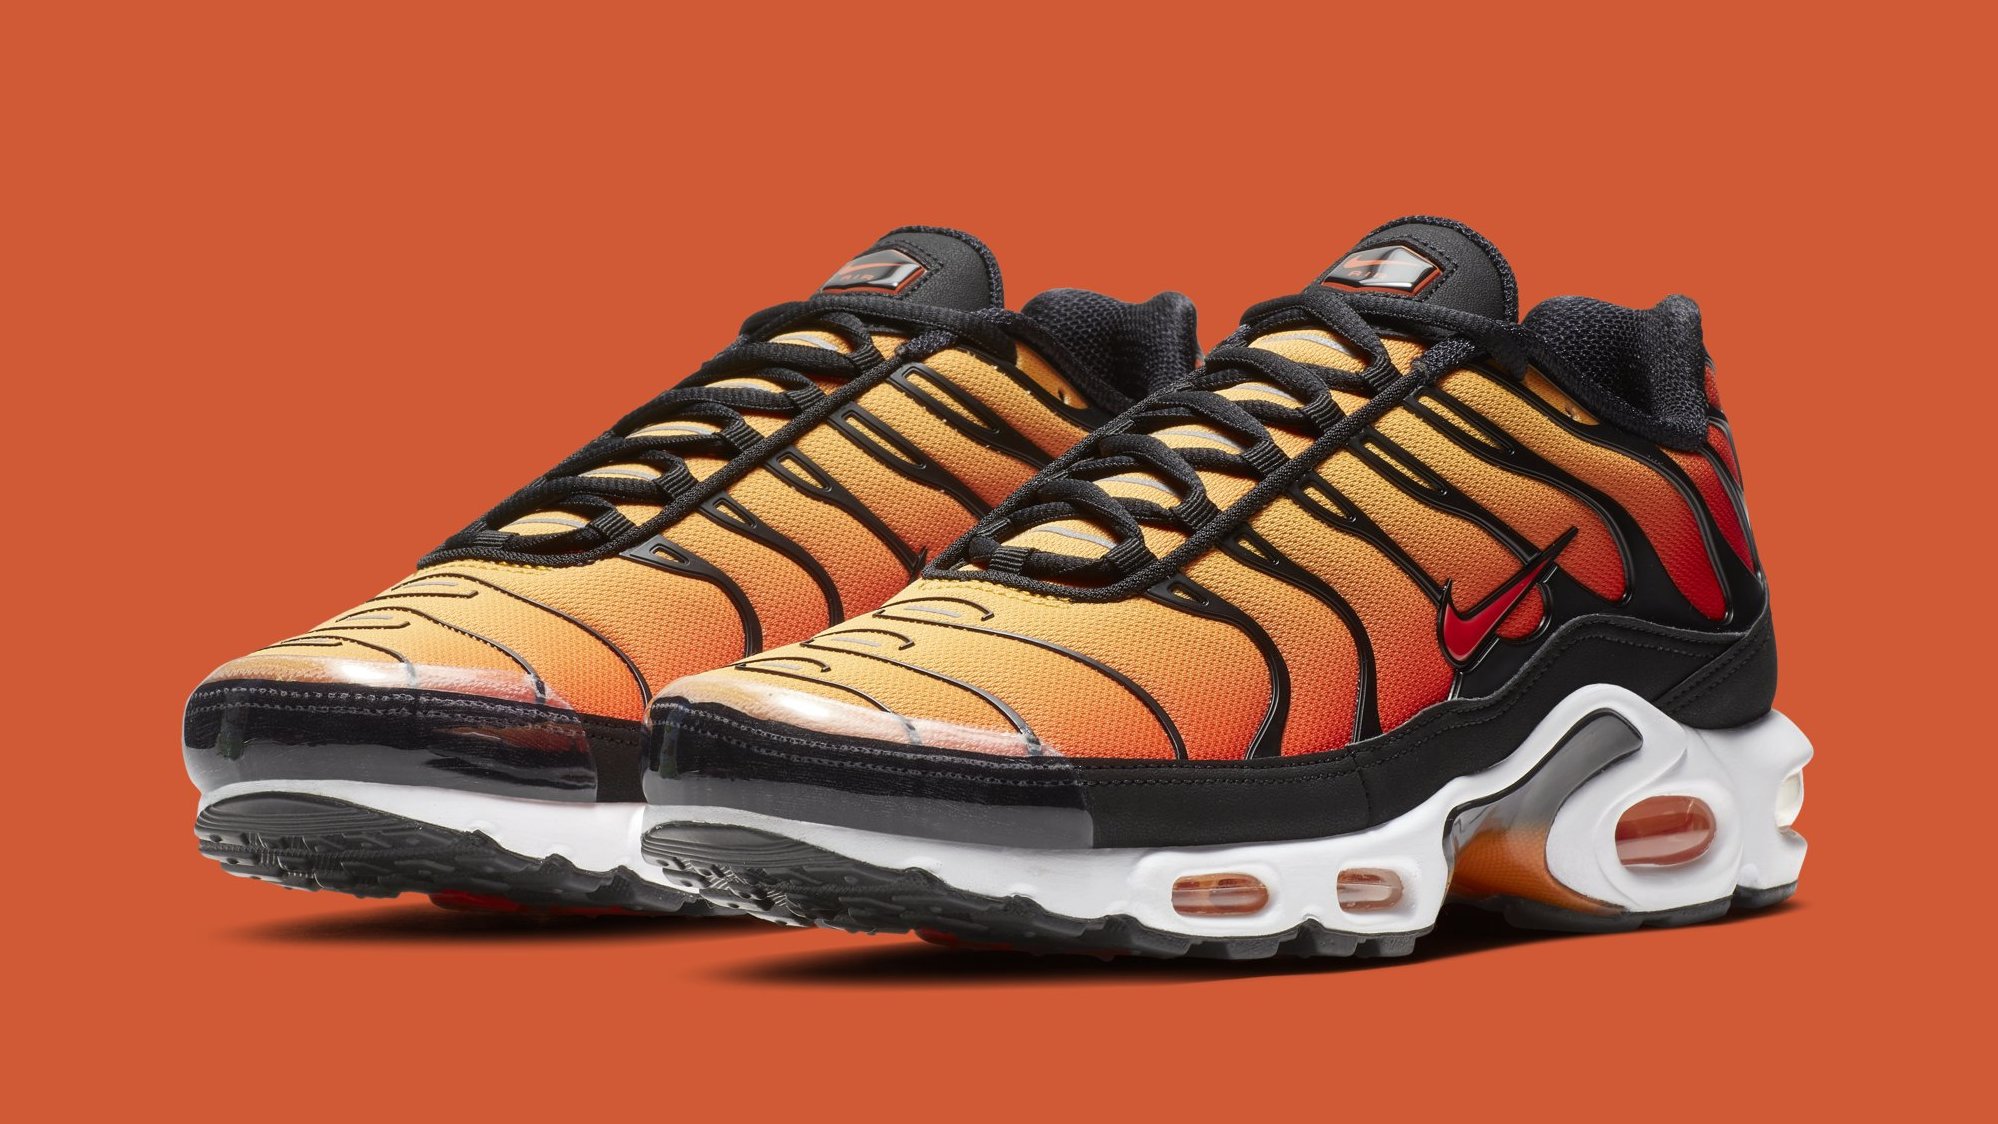 cost Unevenness cold Nike Air Max Plus 'Sunset' Black/Pimento-Ceramic Resin BQ4629-001 Release  Date | Sole Collector